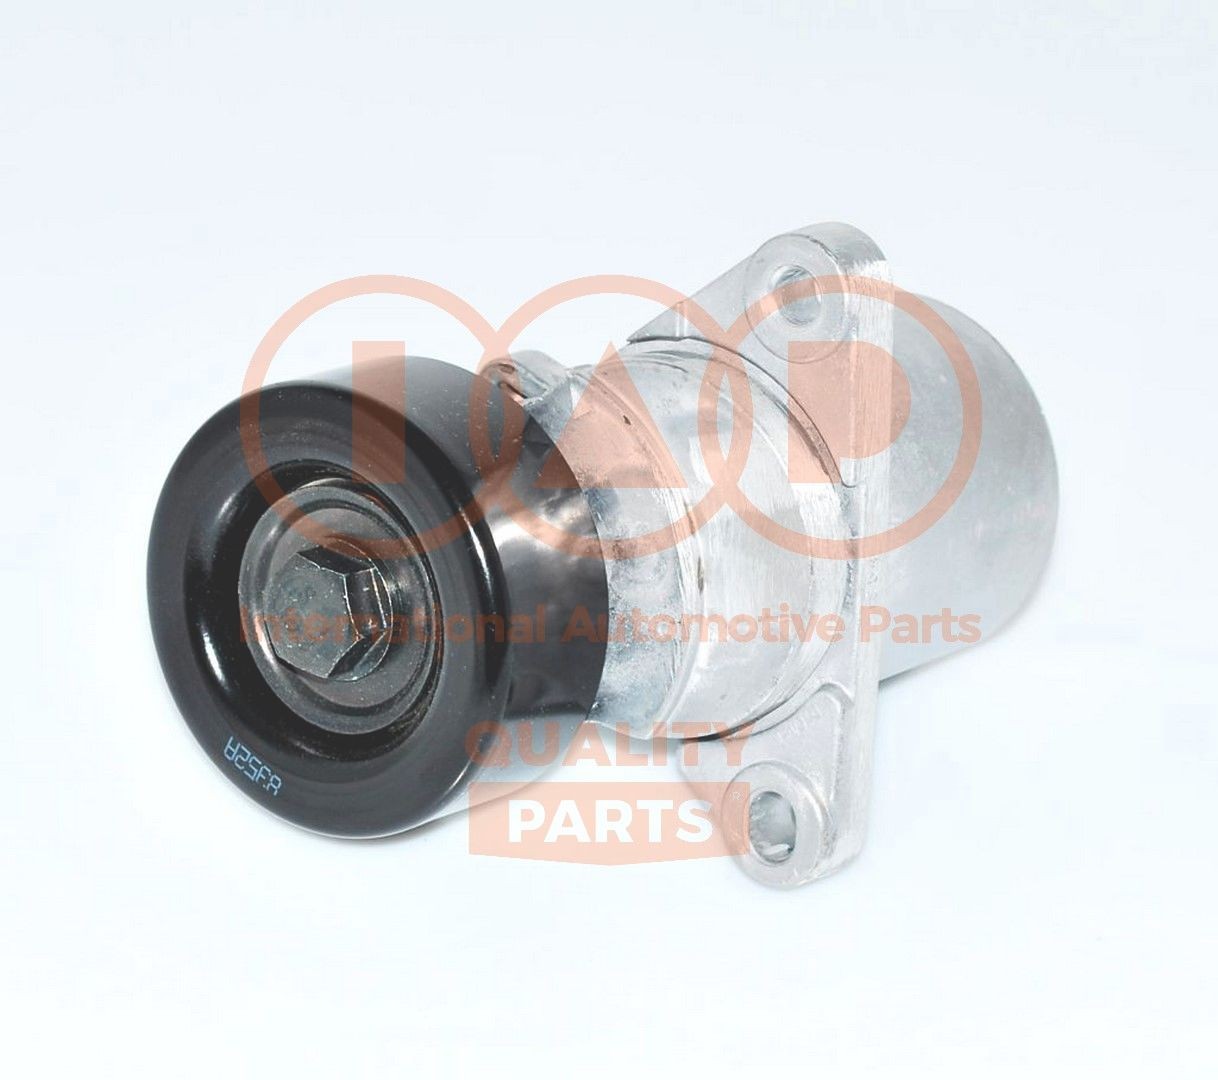 IAP QUALITY PARTS 127-07175 Tensioner pulley 25281 27000